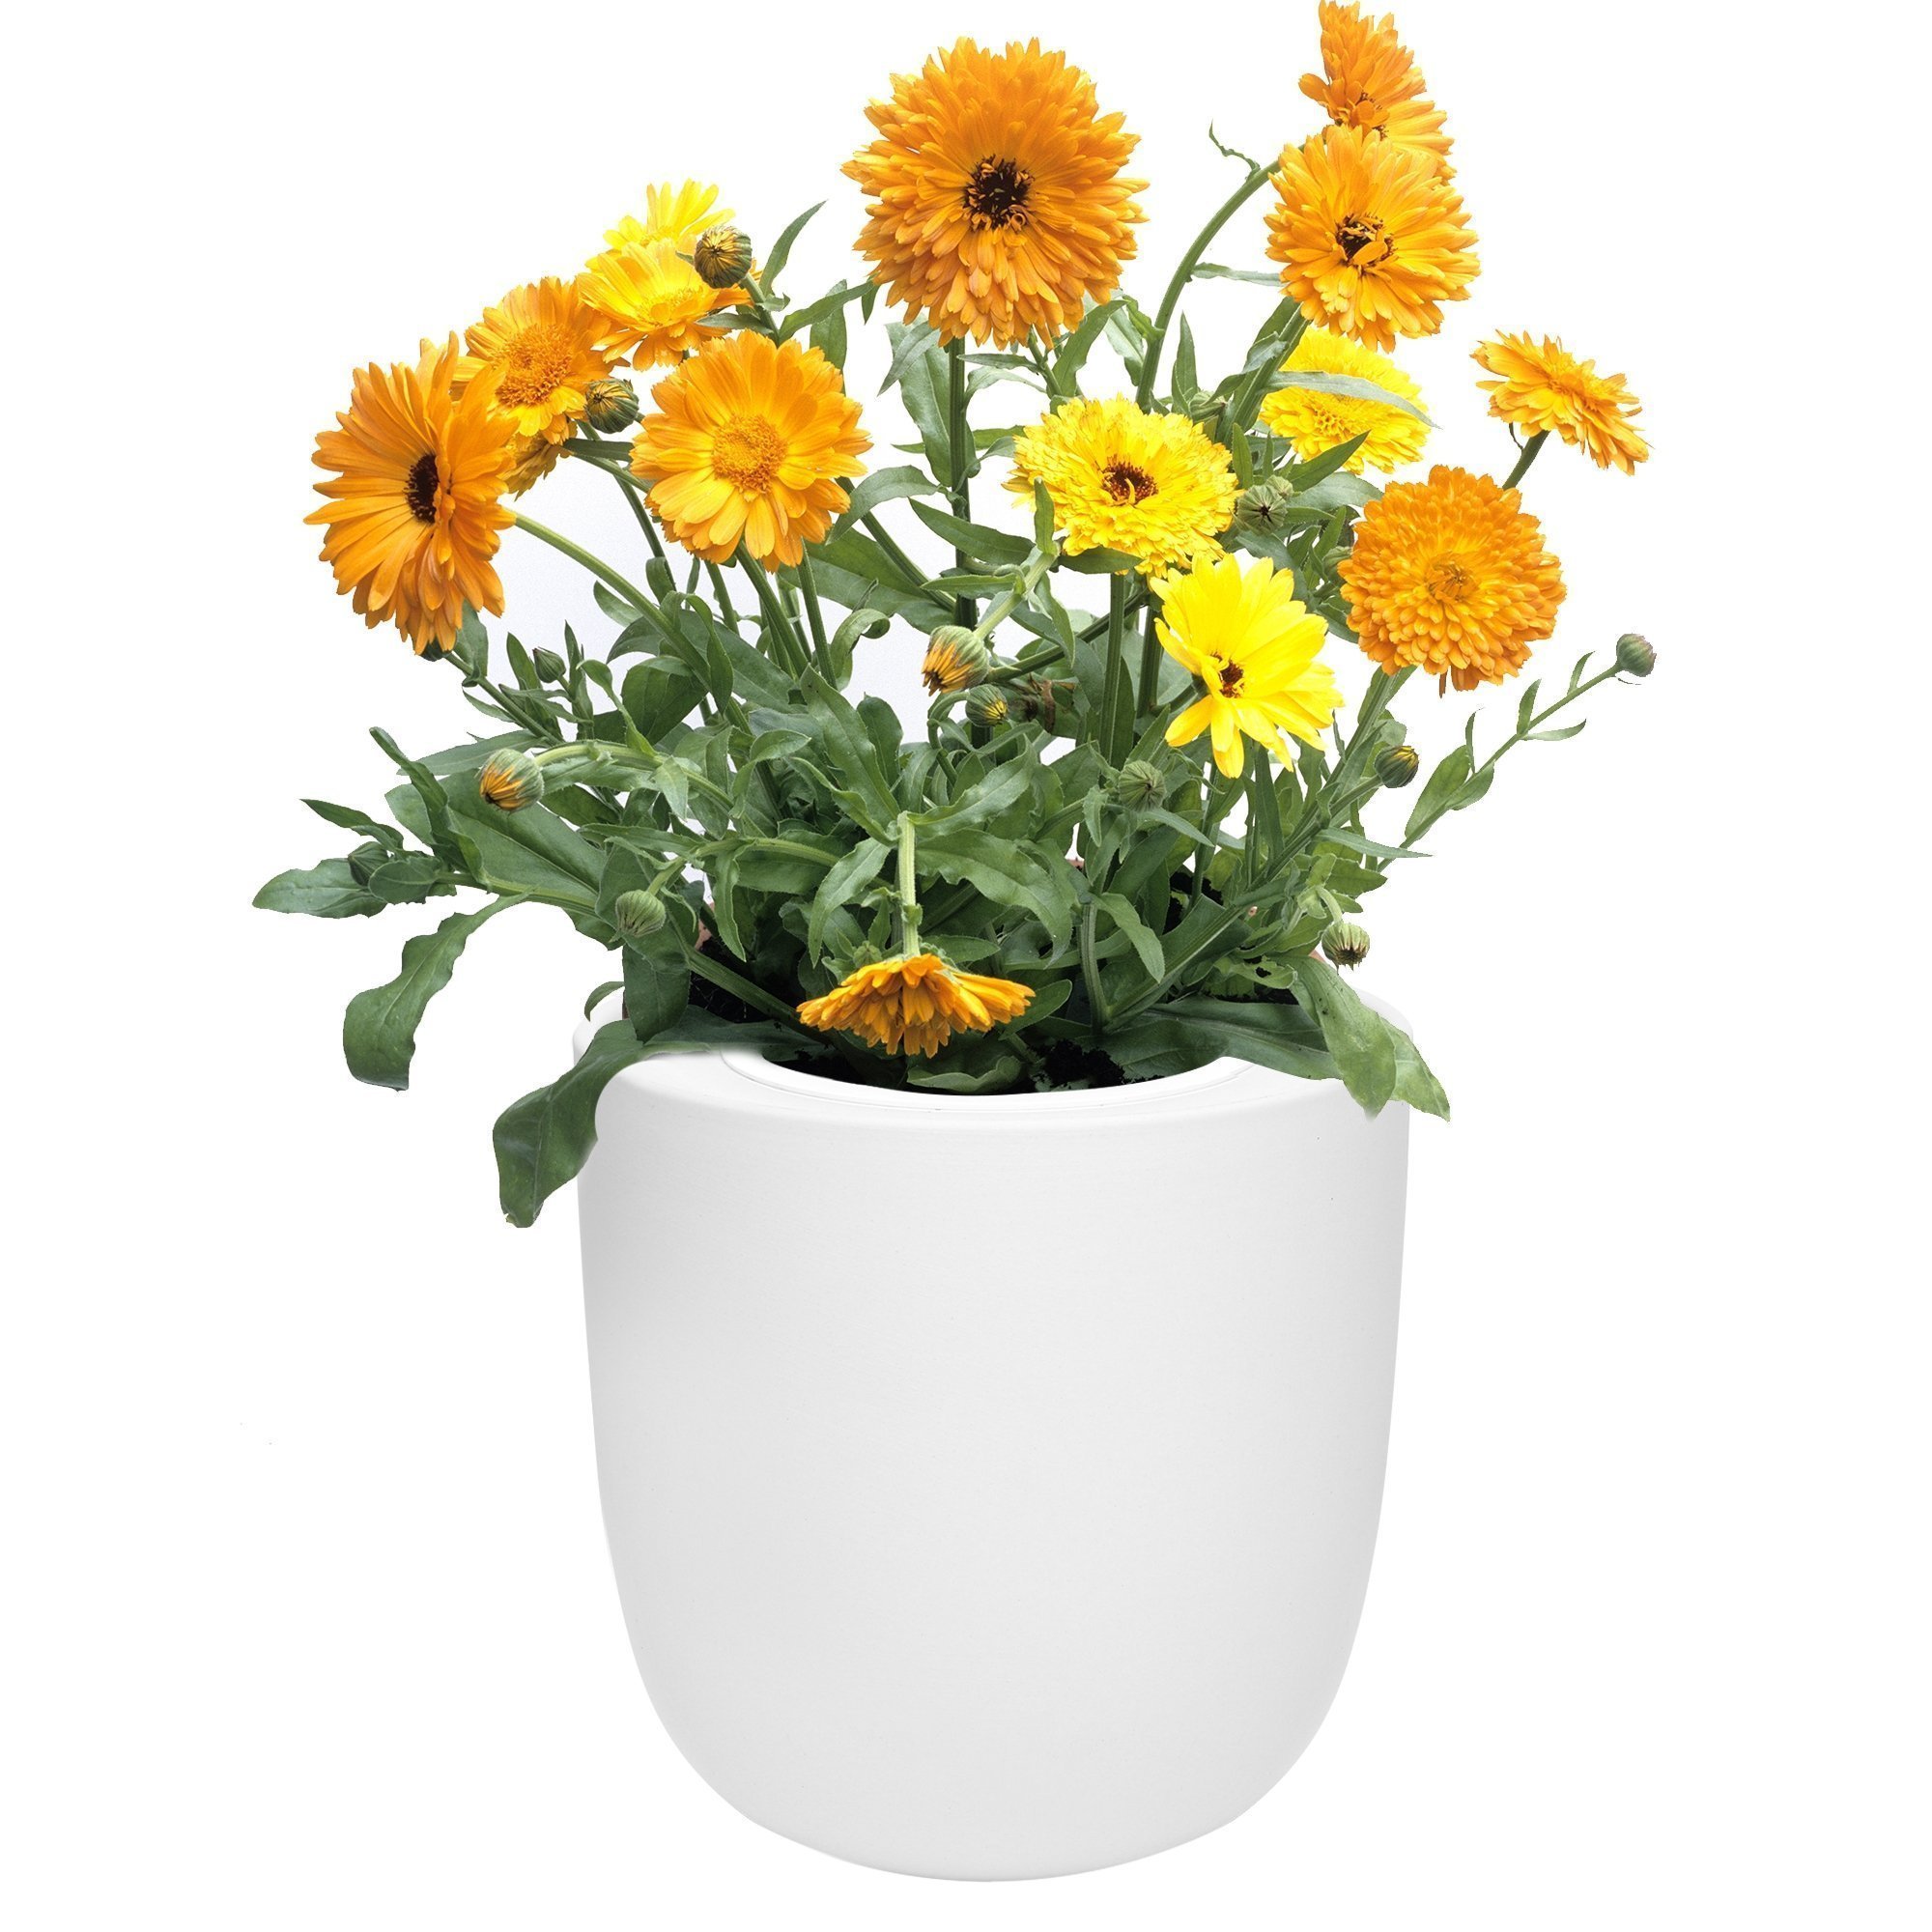 Hydroponic Calendula Growing Kit with White Ceramic Pot and Seeds